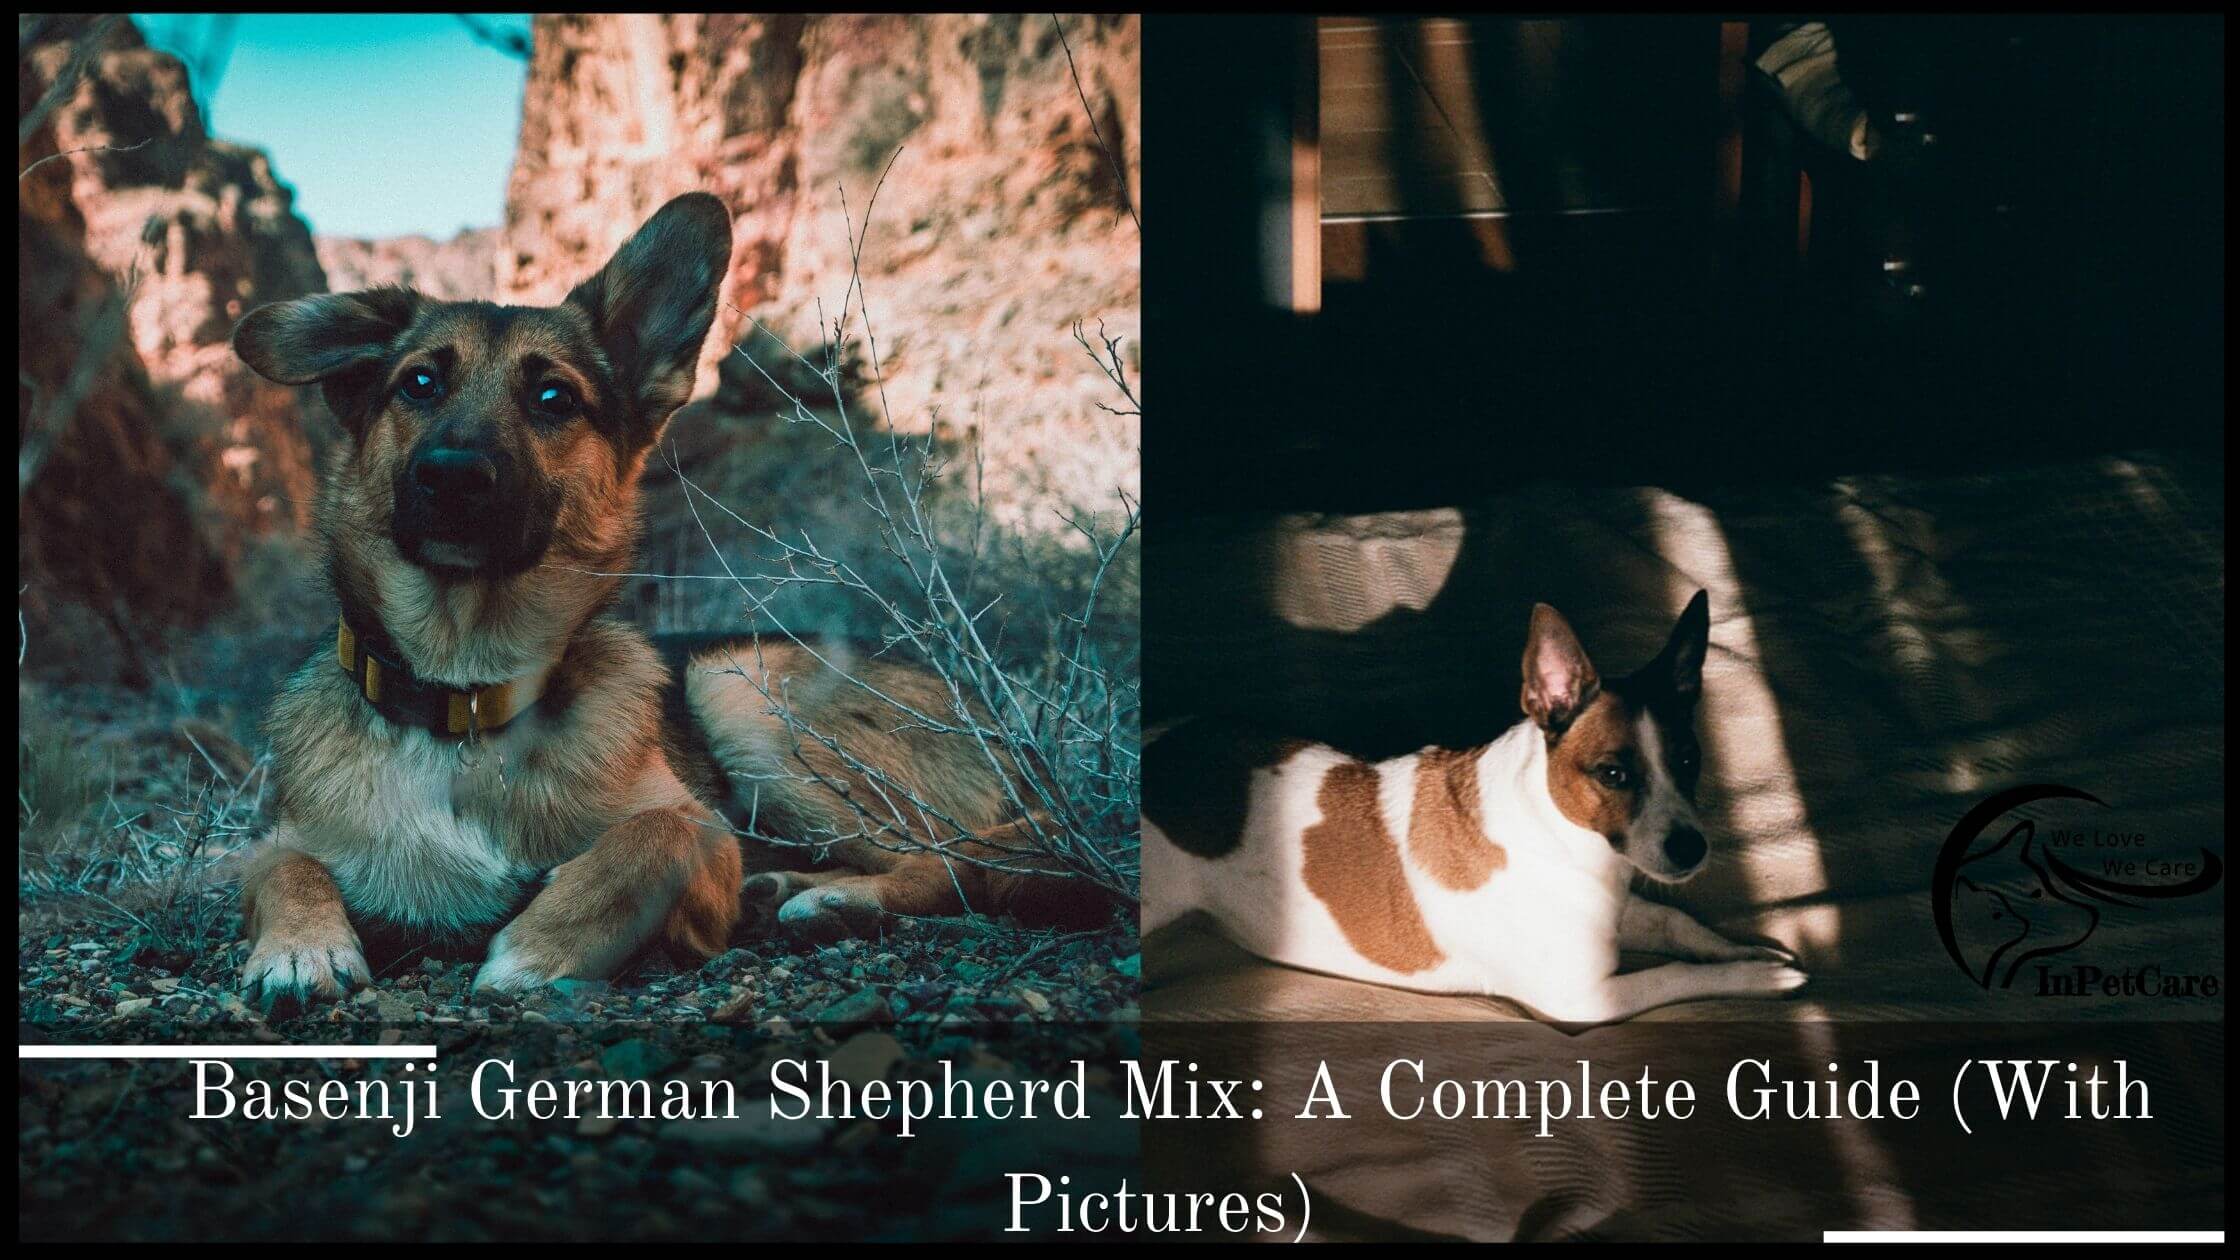 Basenji German Shepherd Mix: A Complete Guide (With Pictures)